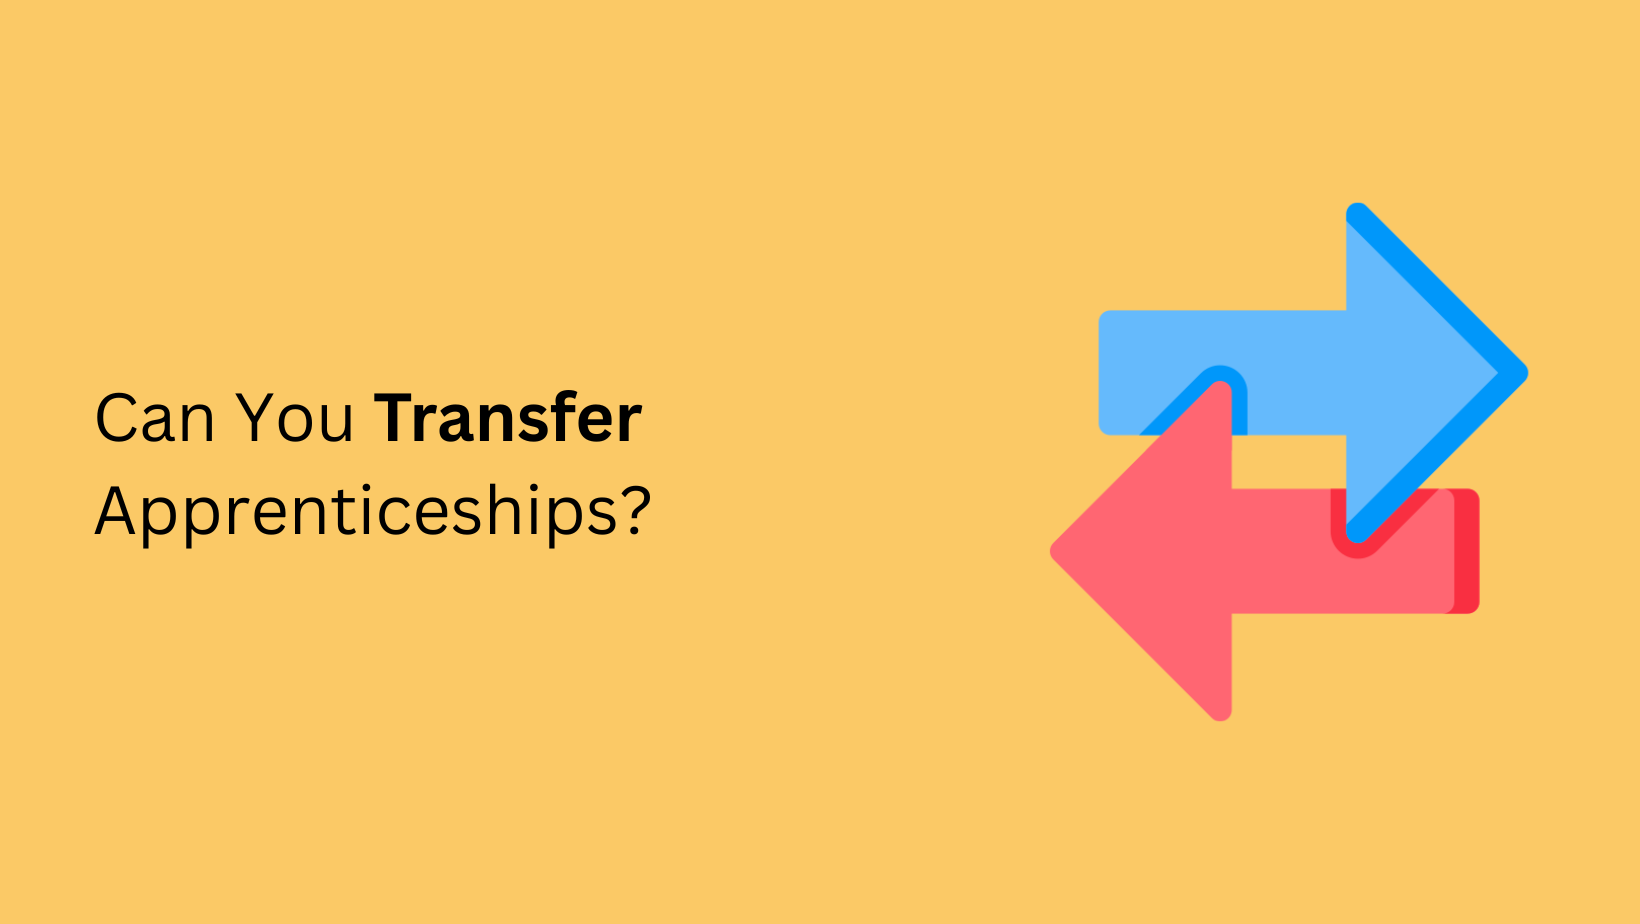 Can You Transfer Apprenticeships